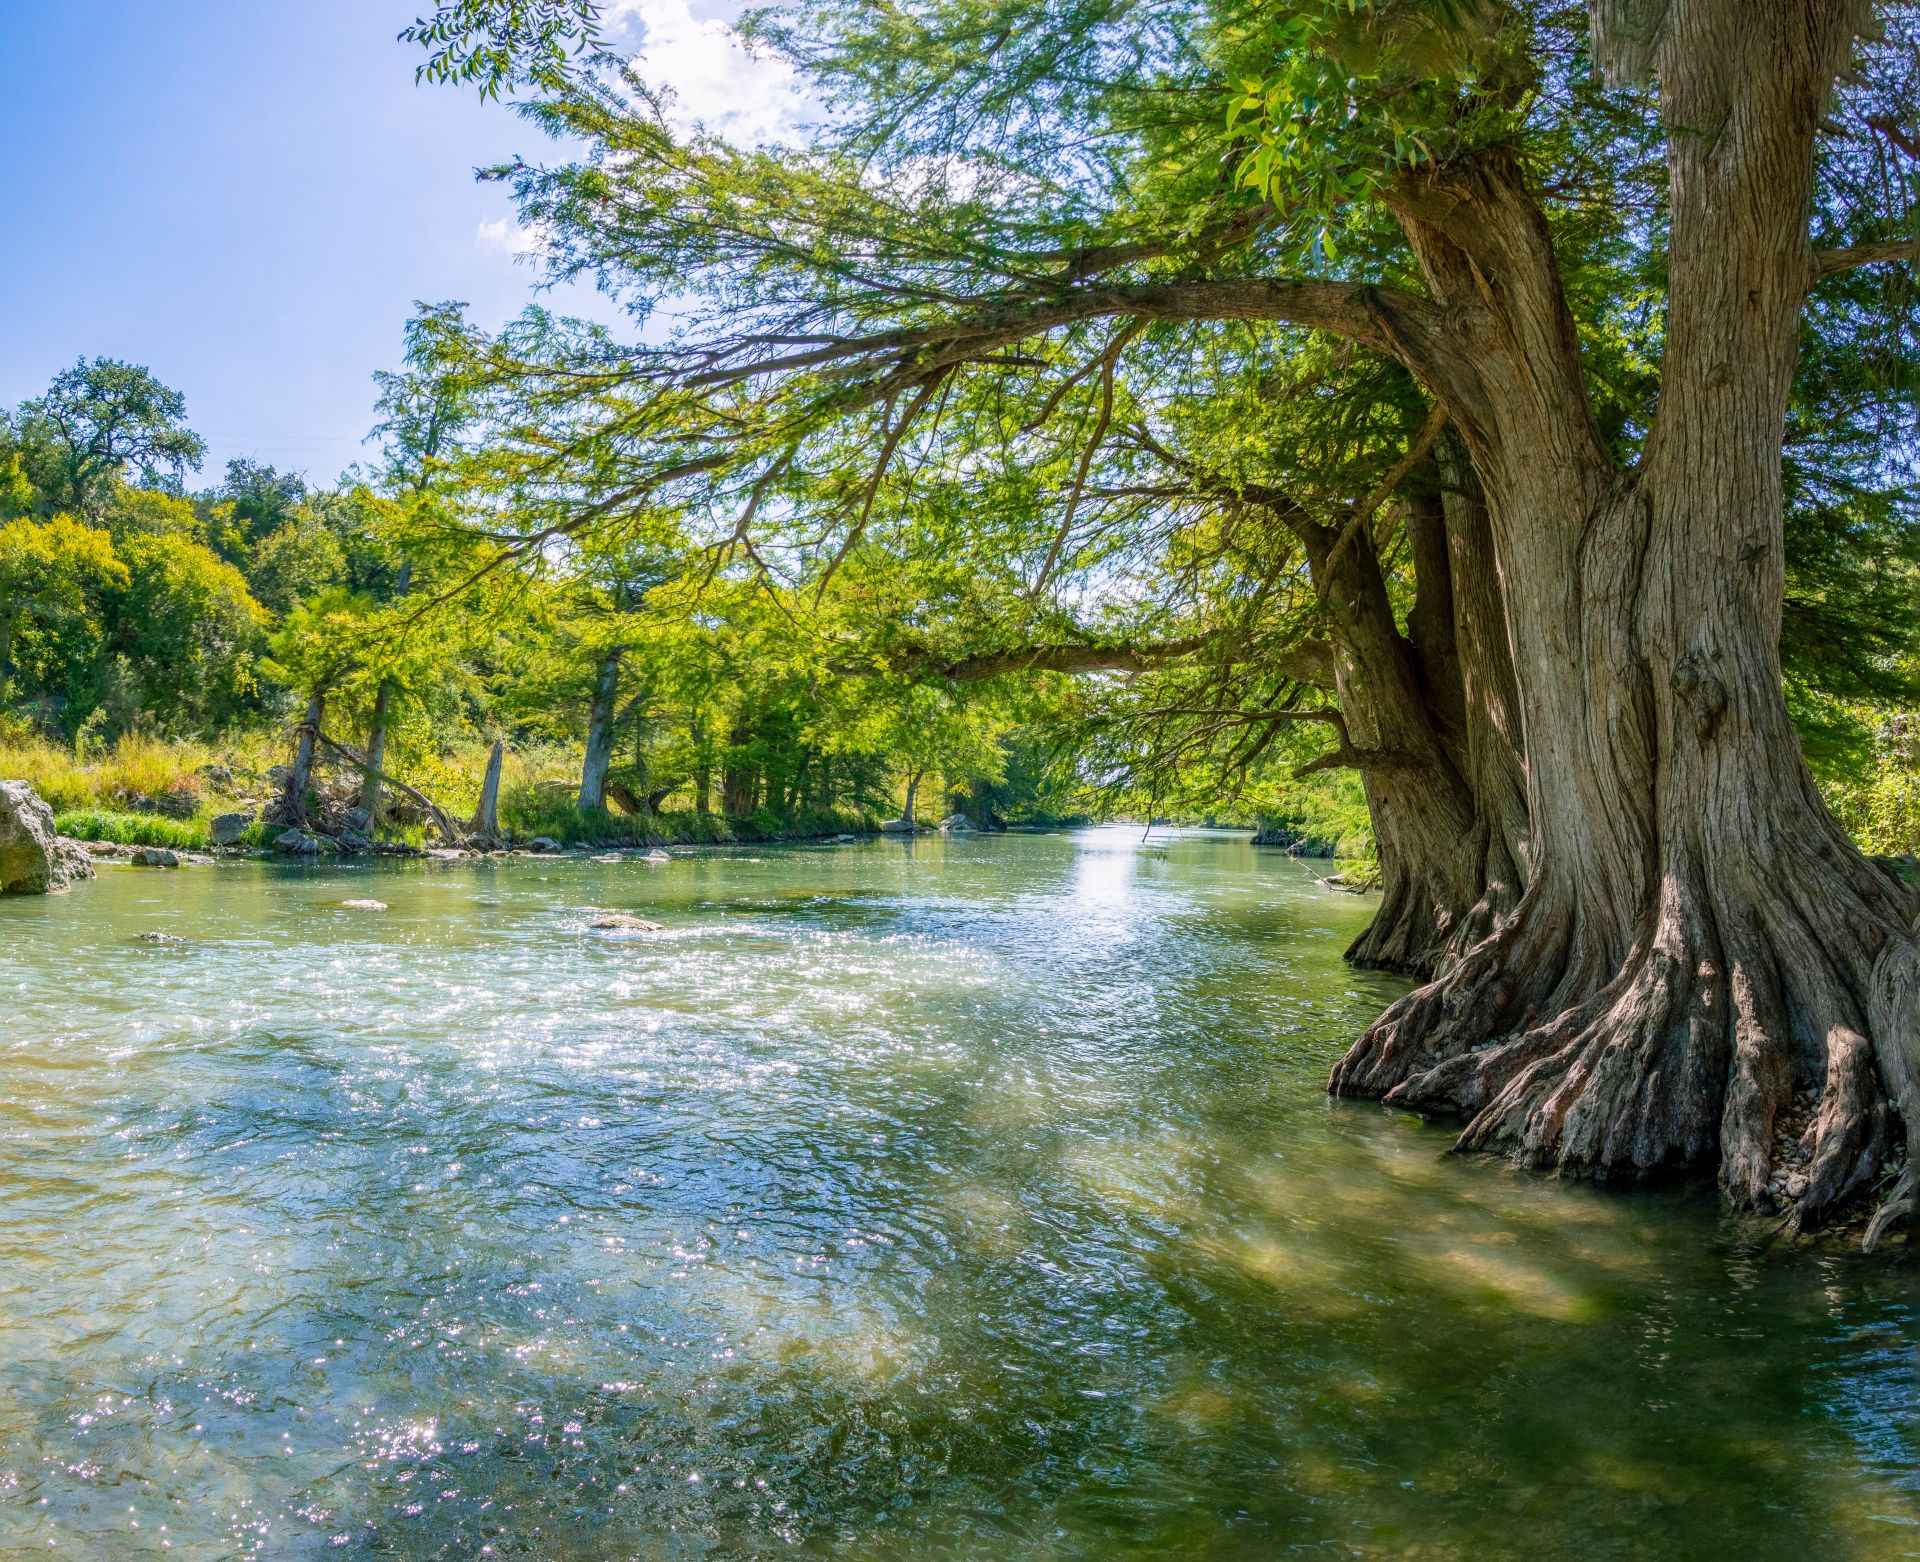 A sunlit bend in the Guadalupe River